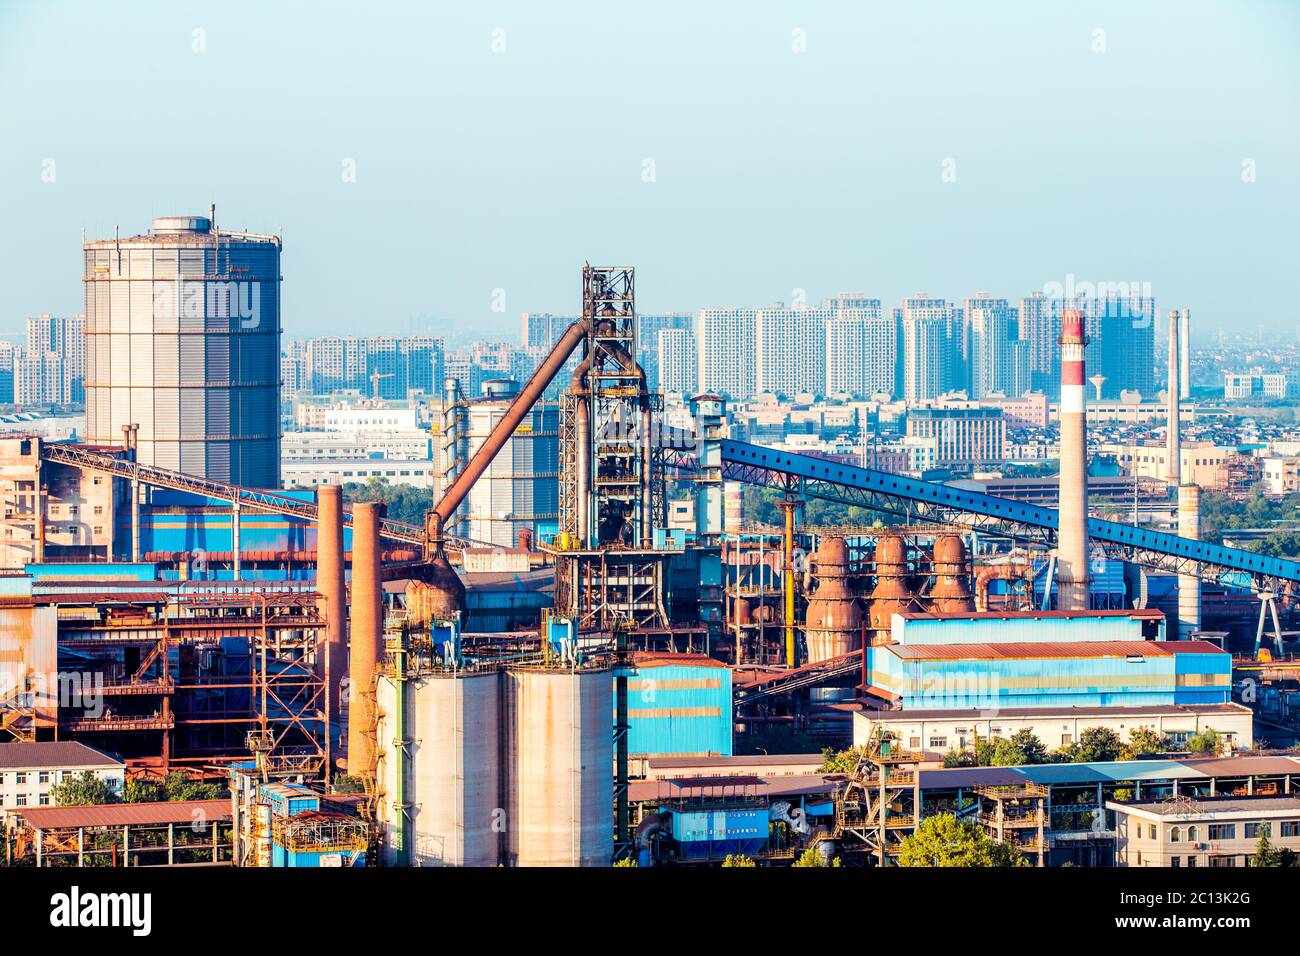 constructions of power plant in steel factory Stock Photo